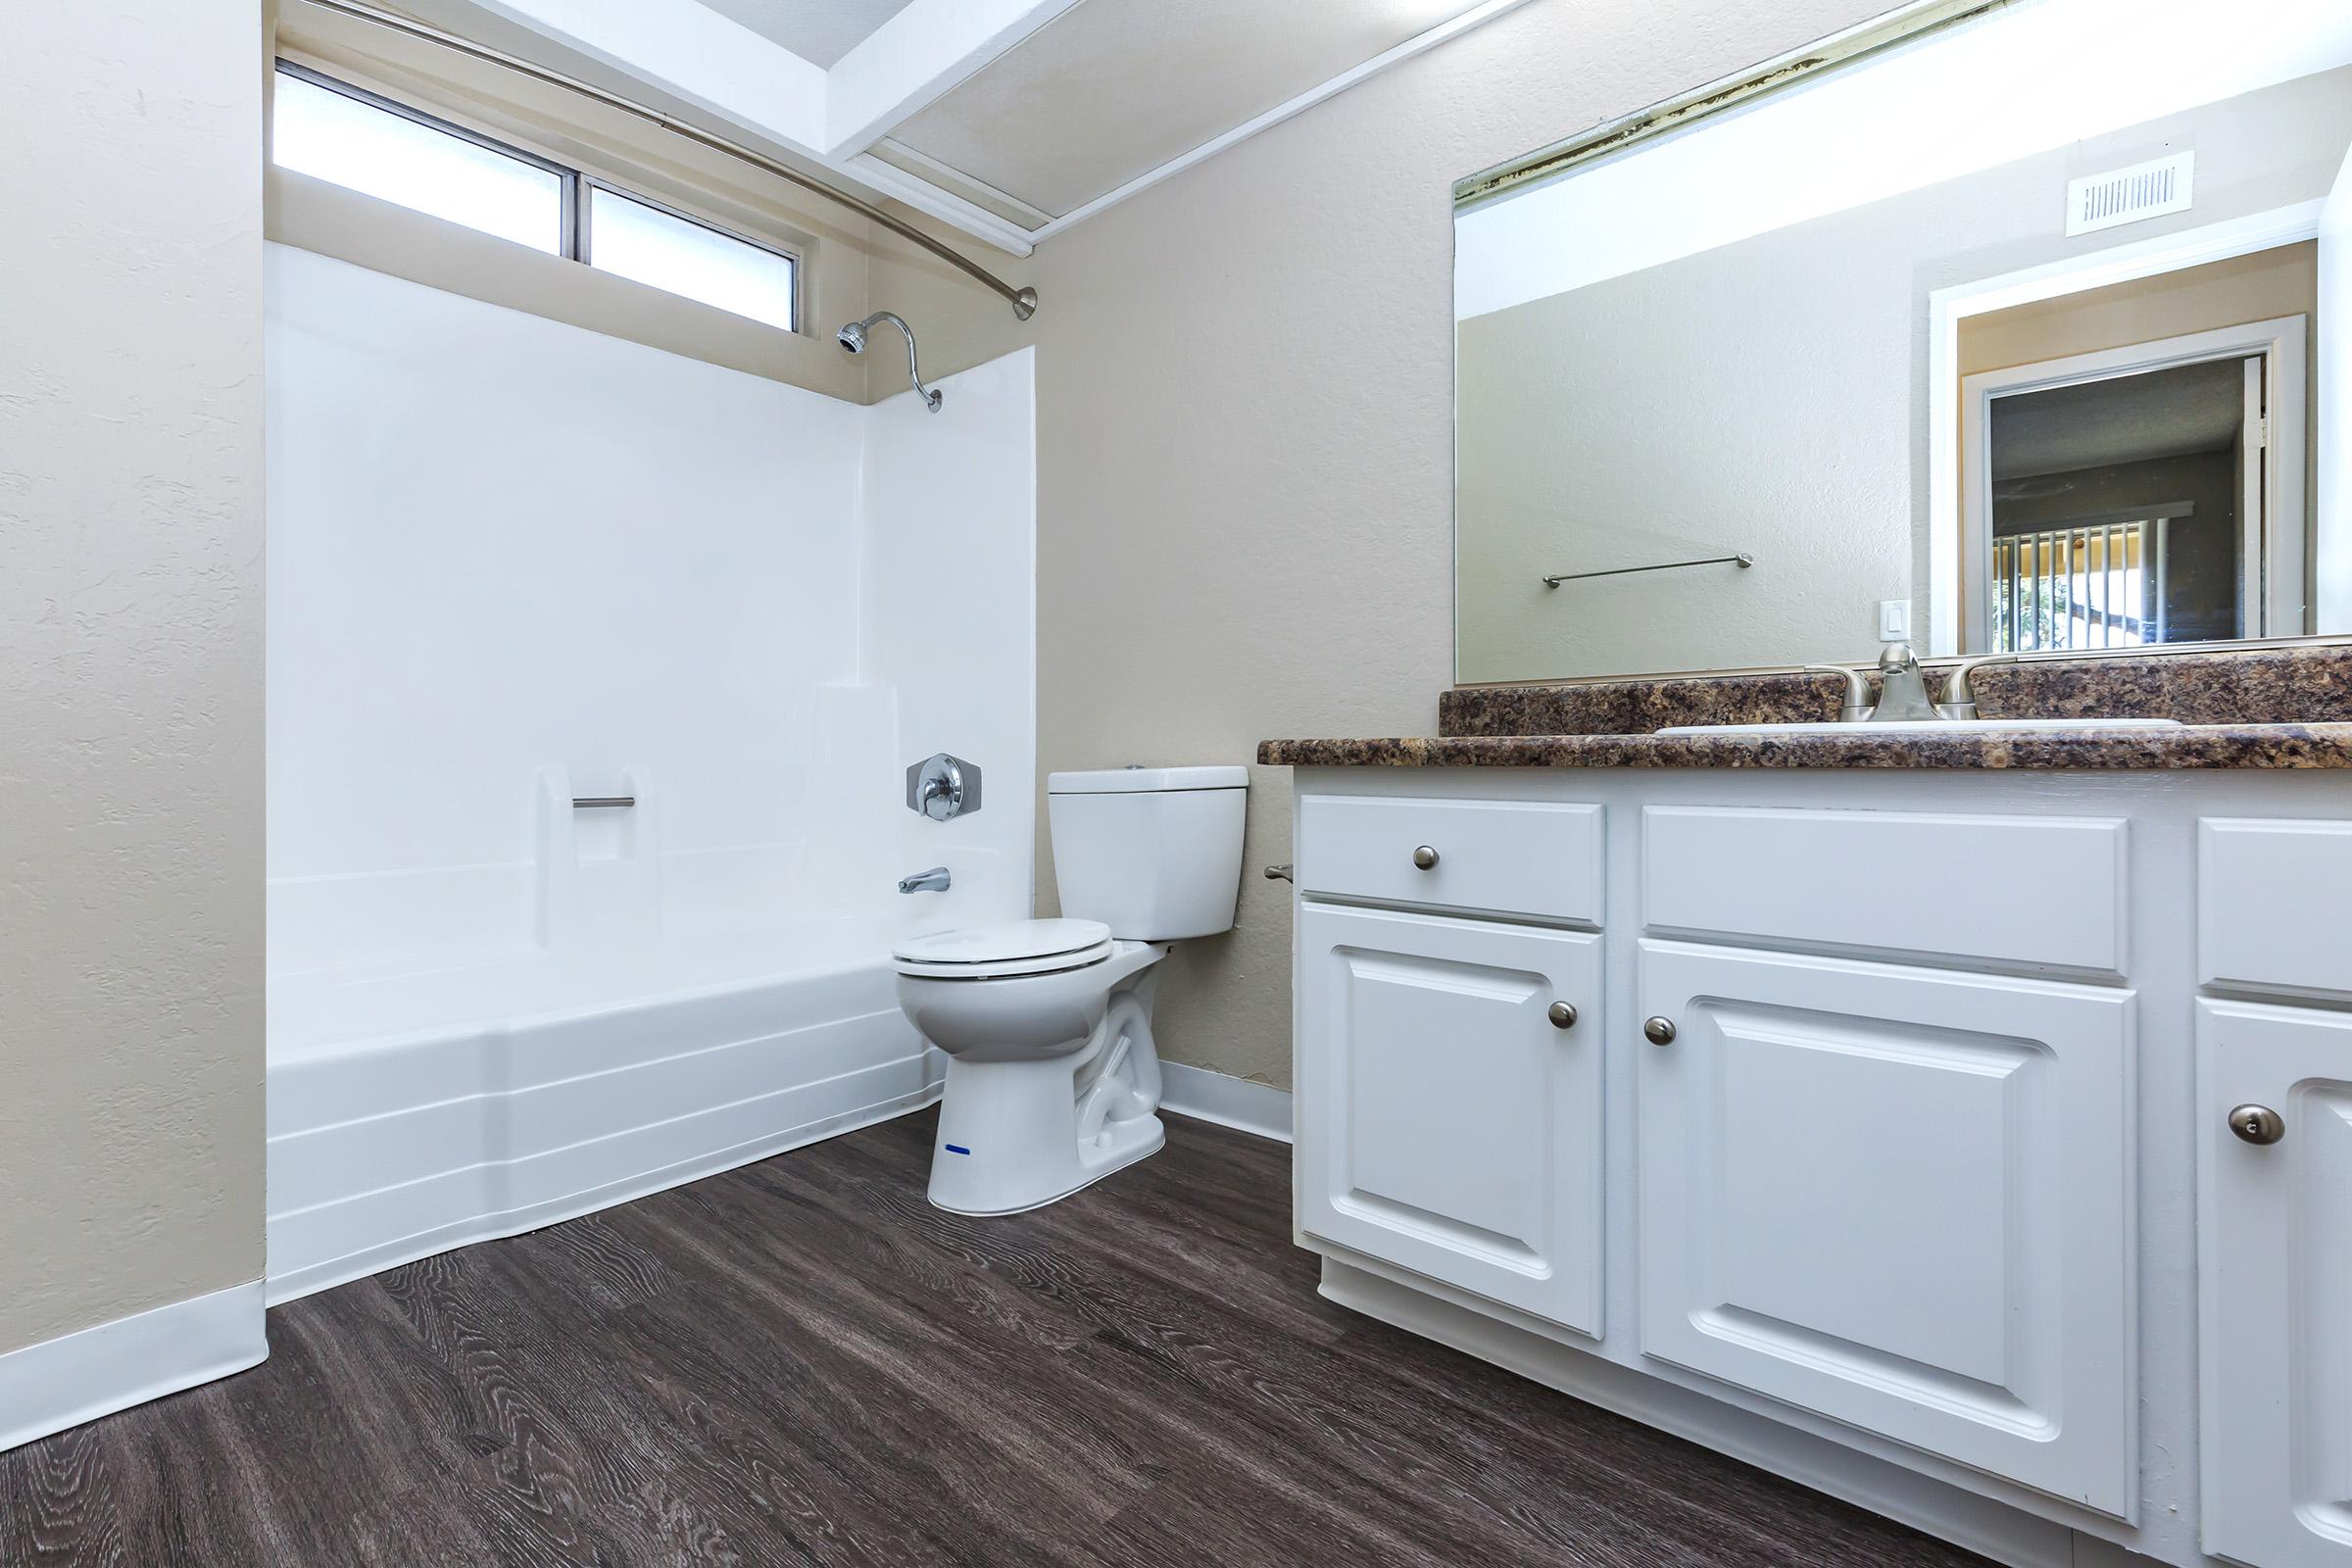 Vacant bathroom with white cabinets and wooden floors